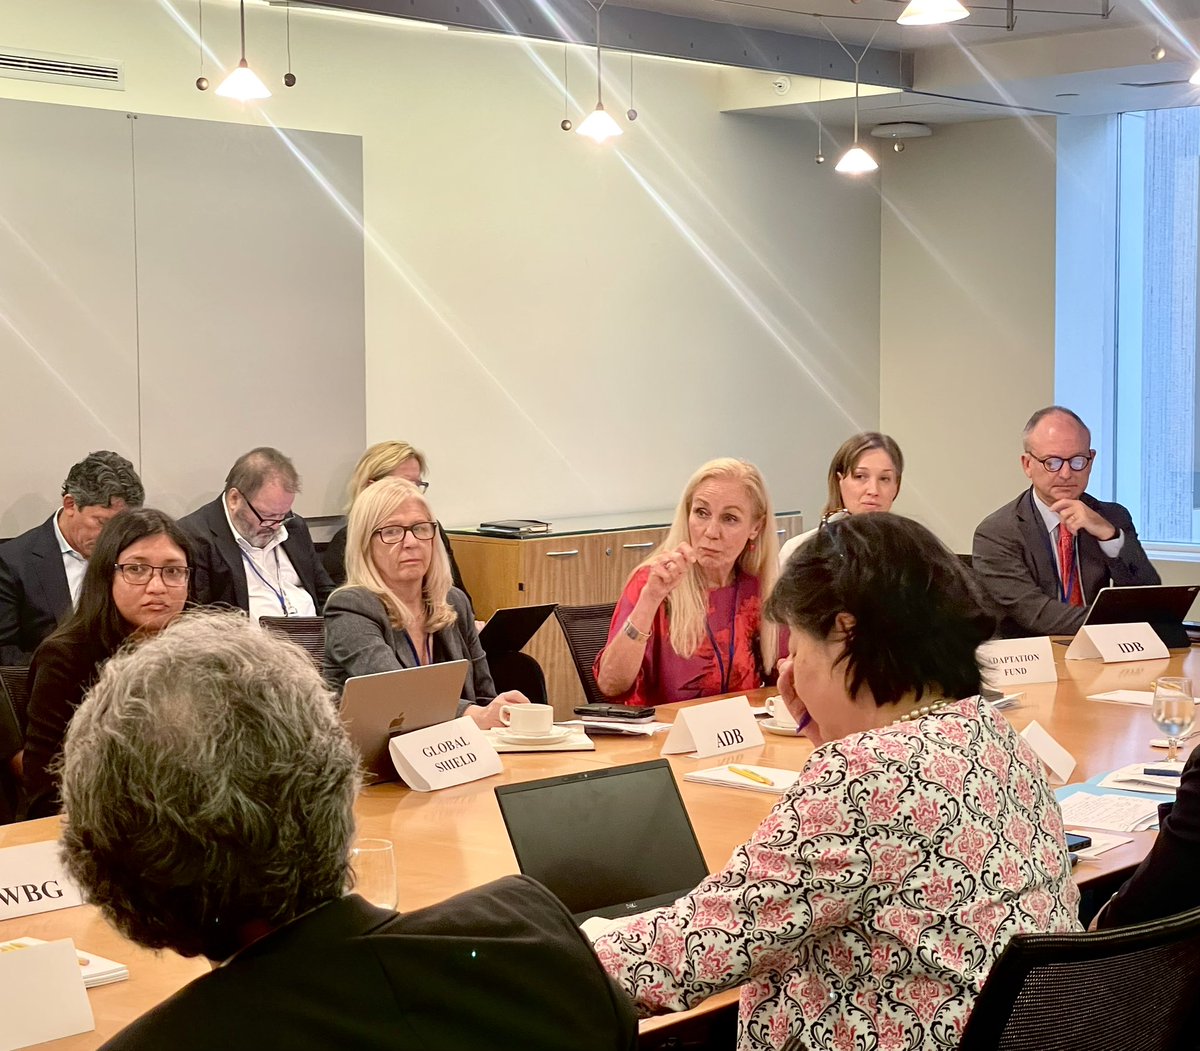 Thank you @BMZ_Bund for convening this discussion on adaptive social protection for timely support to those impacted by climate shocks. @UNICEF looks forward to working with partners to ensure climate finance crowds-in - and not crowds-out - development finance #ForEveryChild